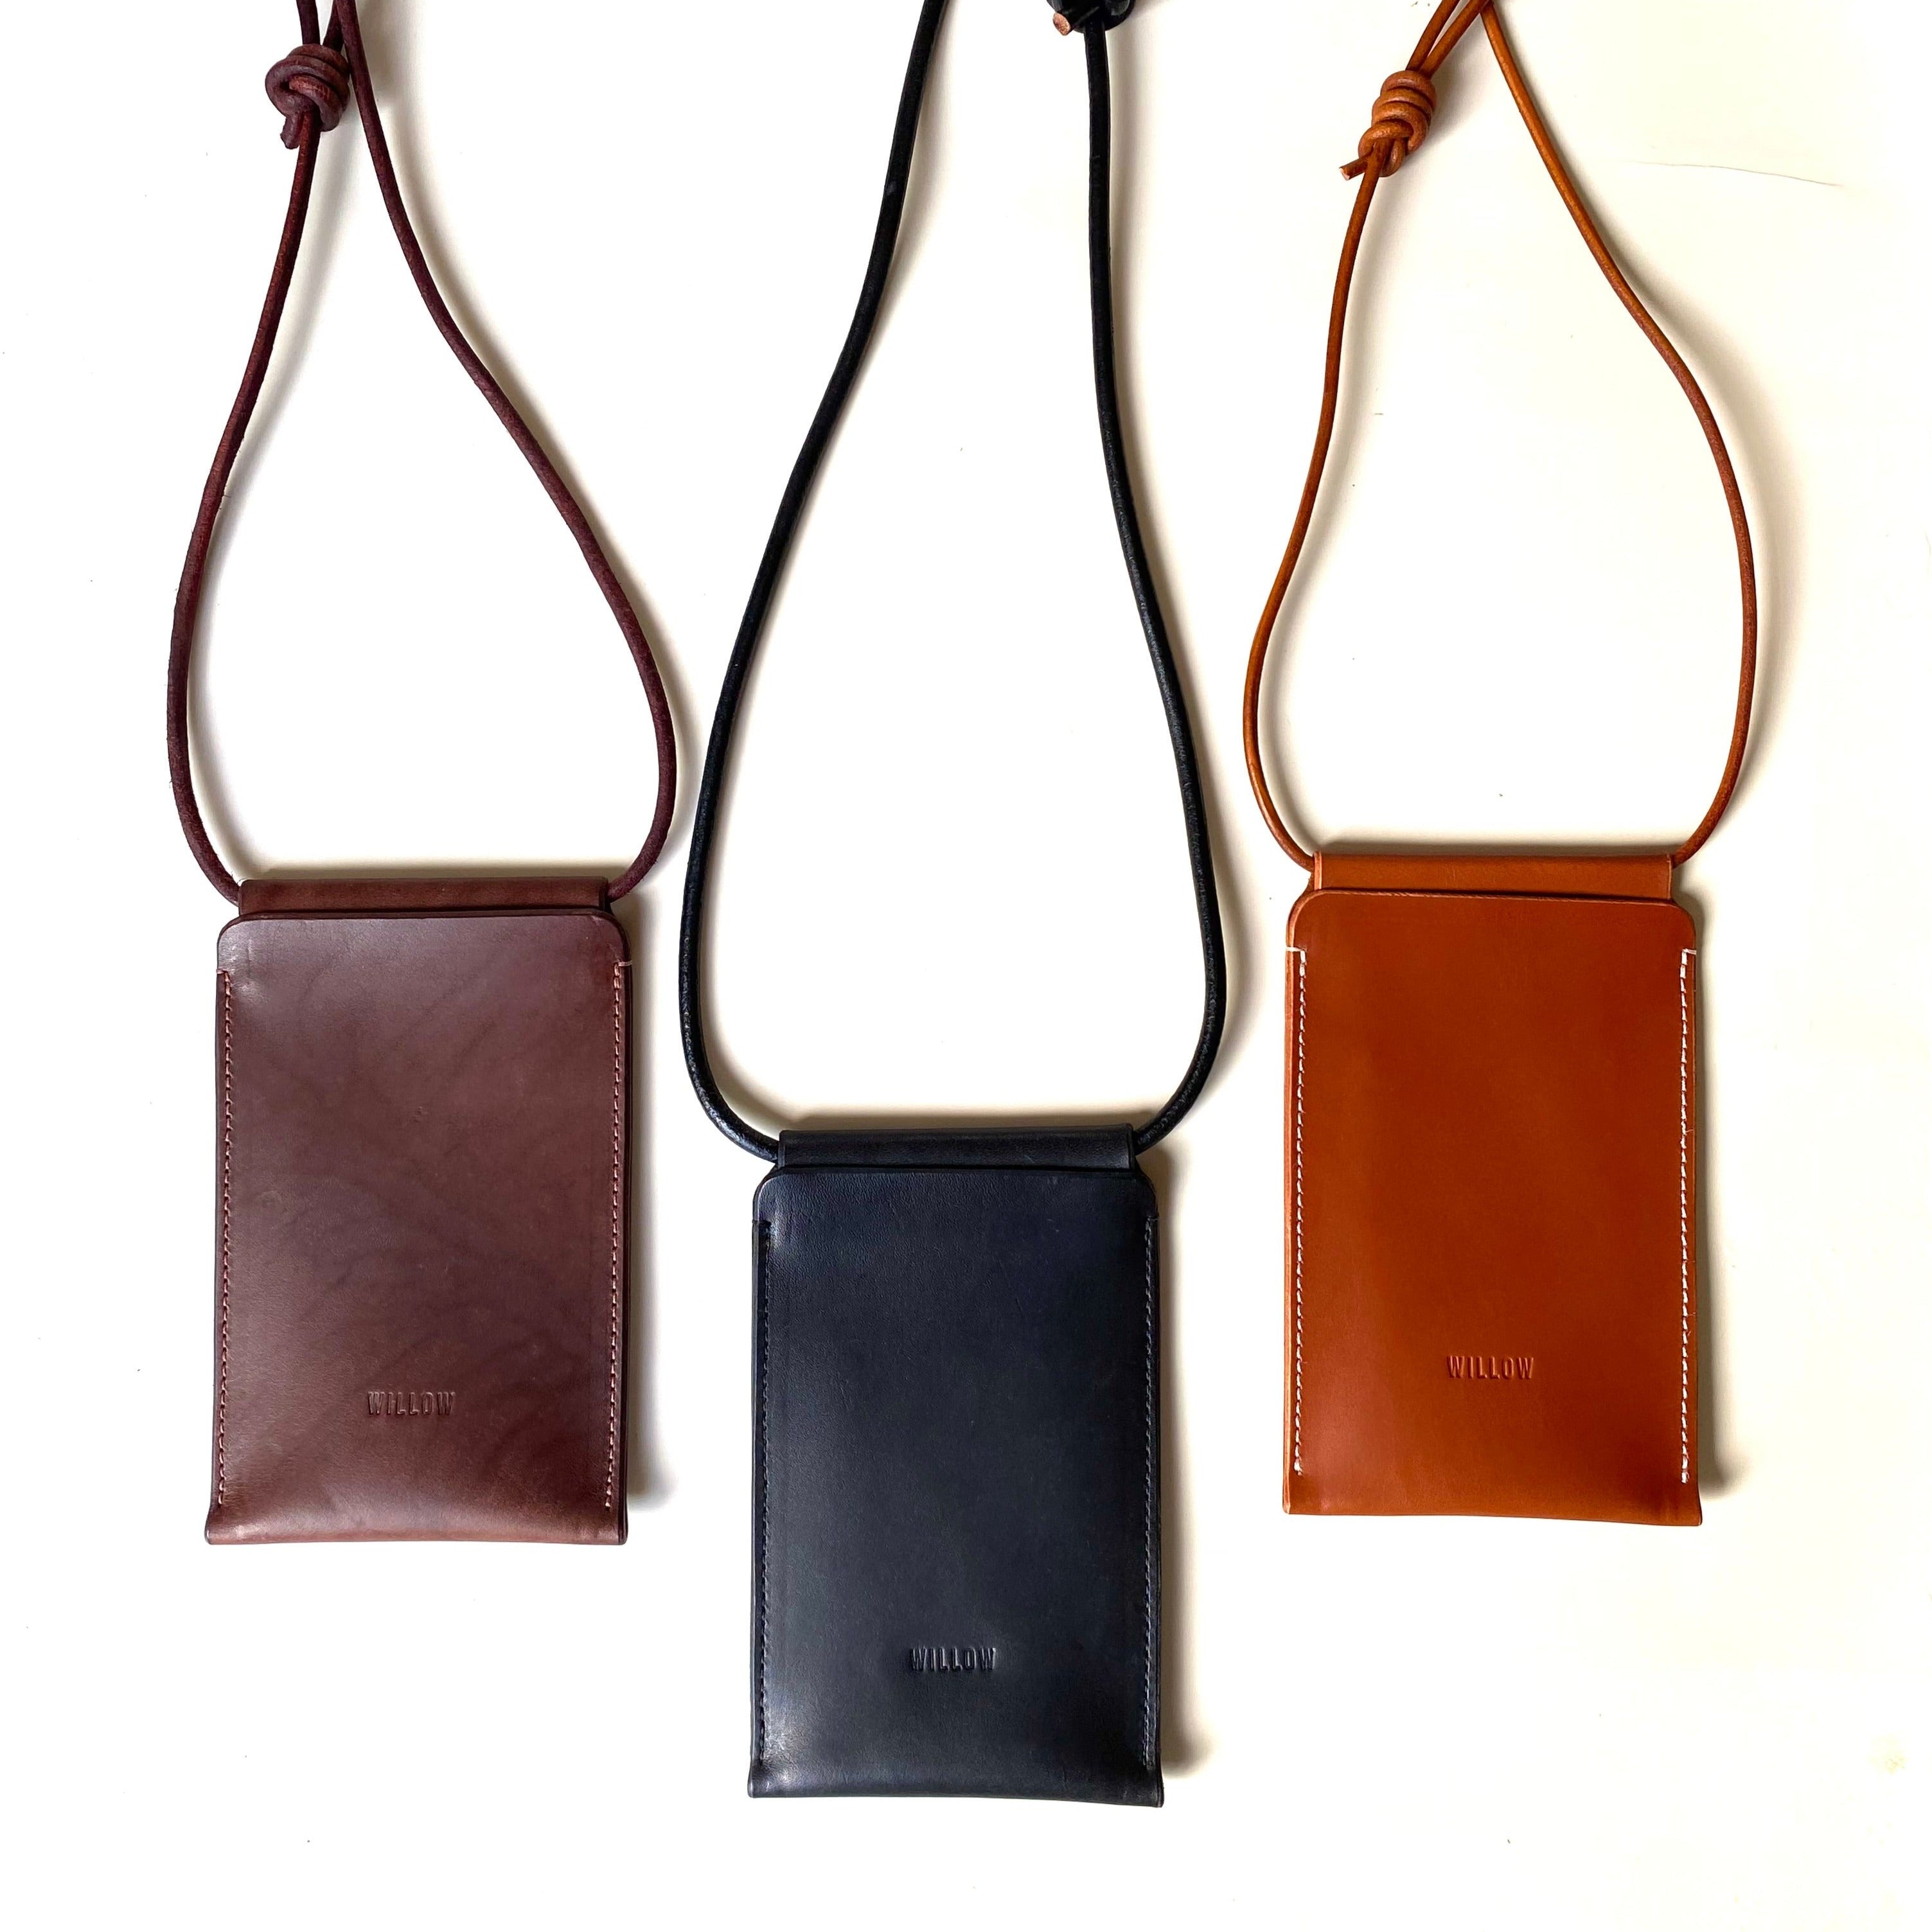 Handmade Leather Phone Carrier - Personalisation Available